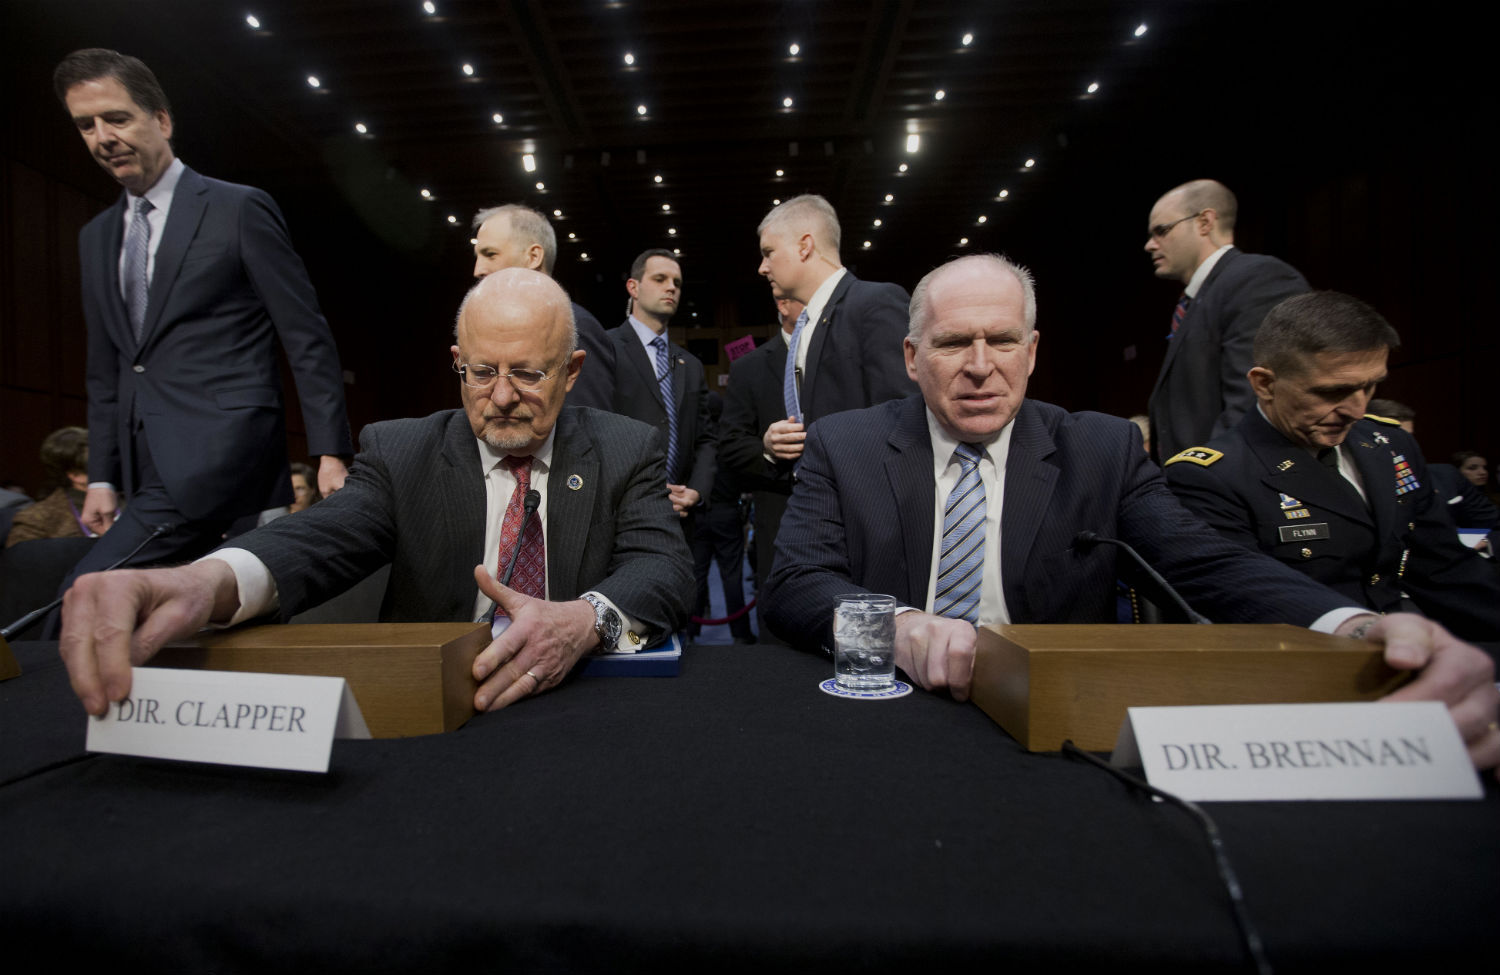 With Confirmation of CIA Spying on the Senate, It Is Time for Serious Oversight